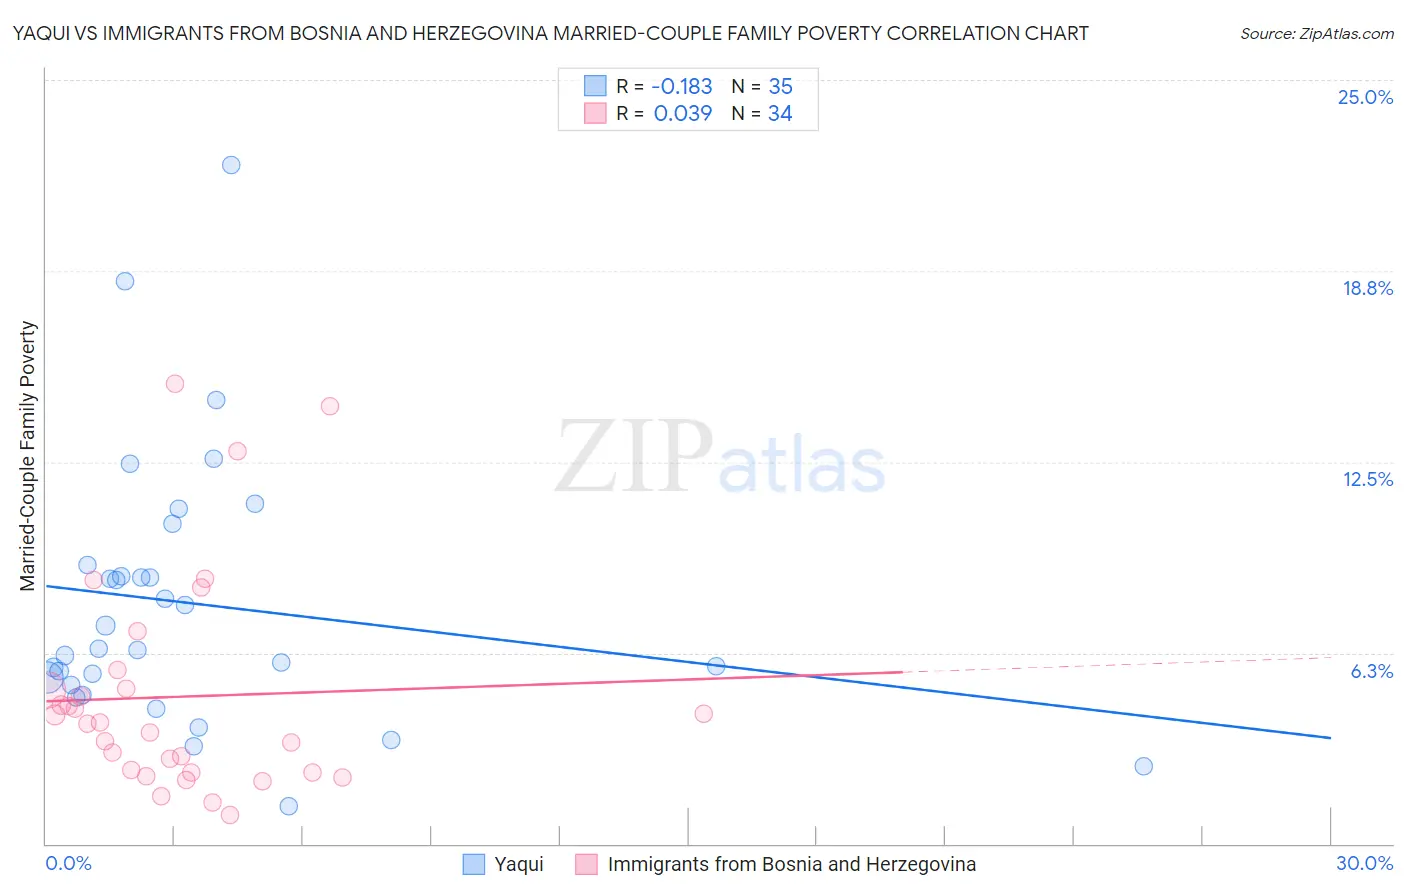 Yaqui vs Immigrants from Bosnia and Herzegovina Married-Couple Family Poverty